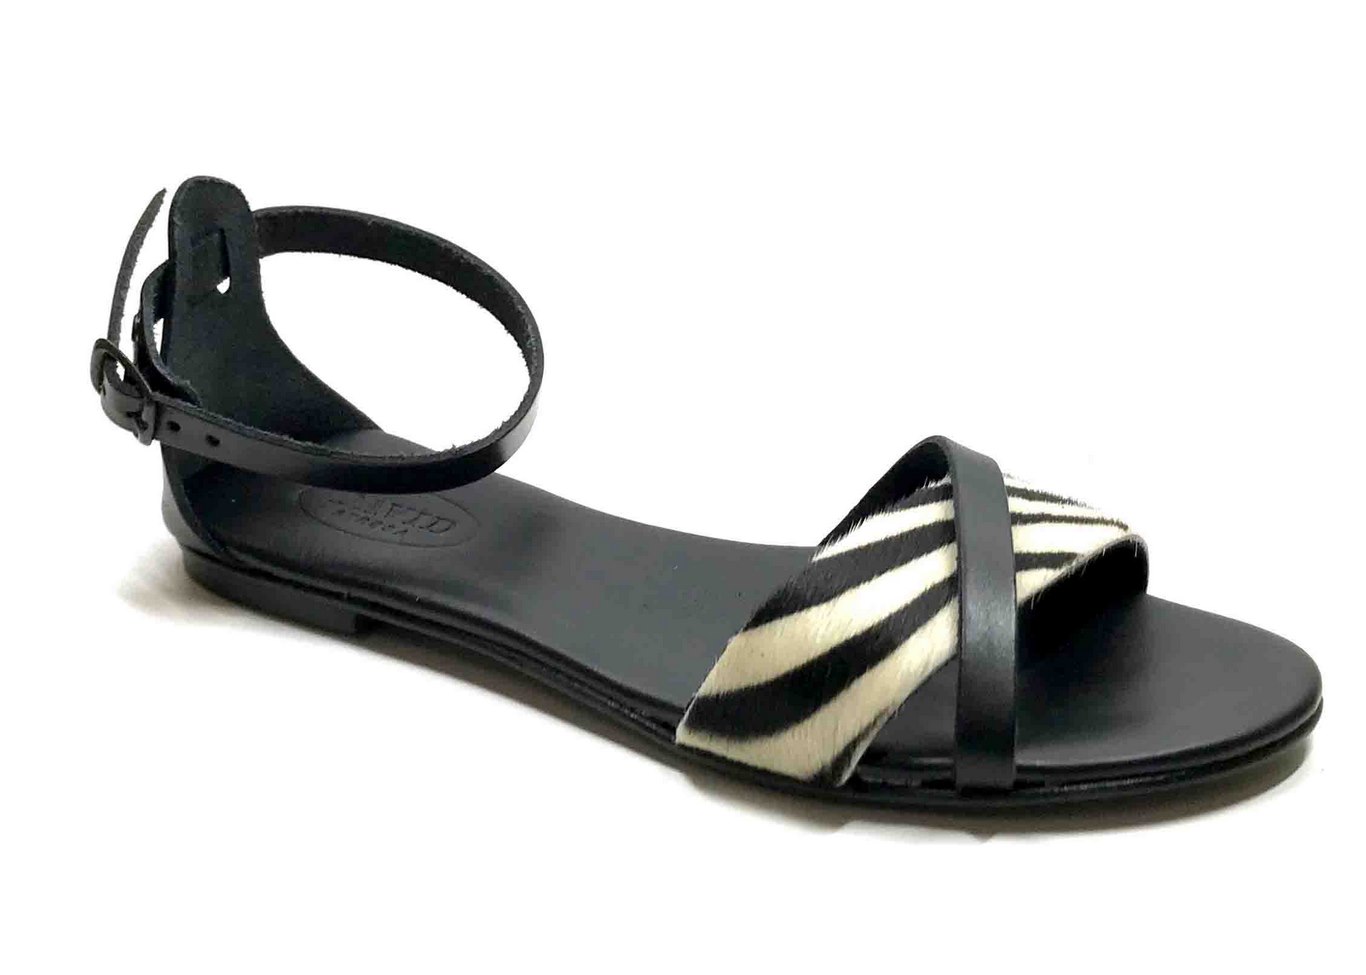 Padded sole Sandals in Brown cowhide leather and zebra print ponyskin-effect